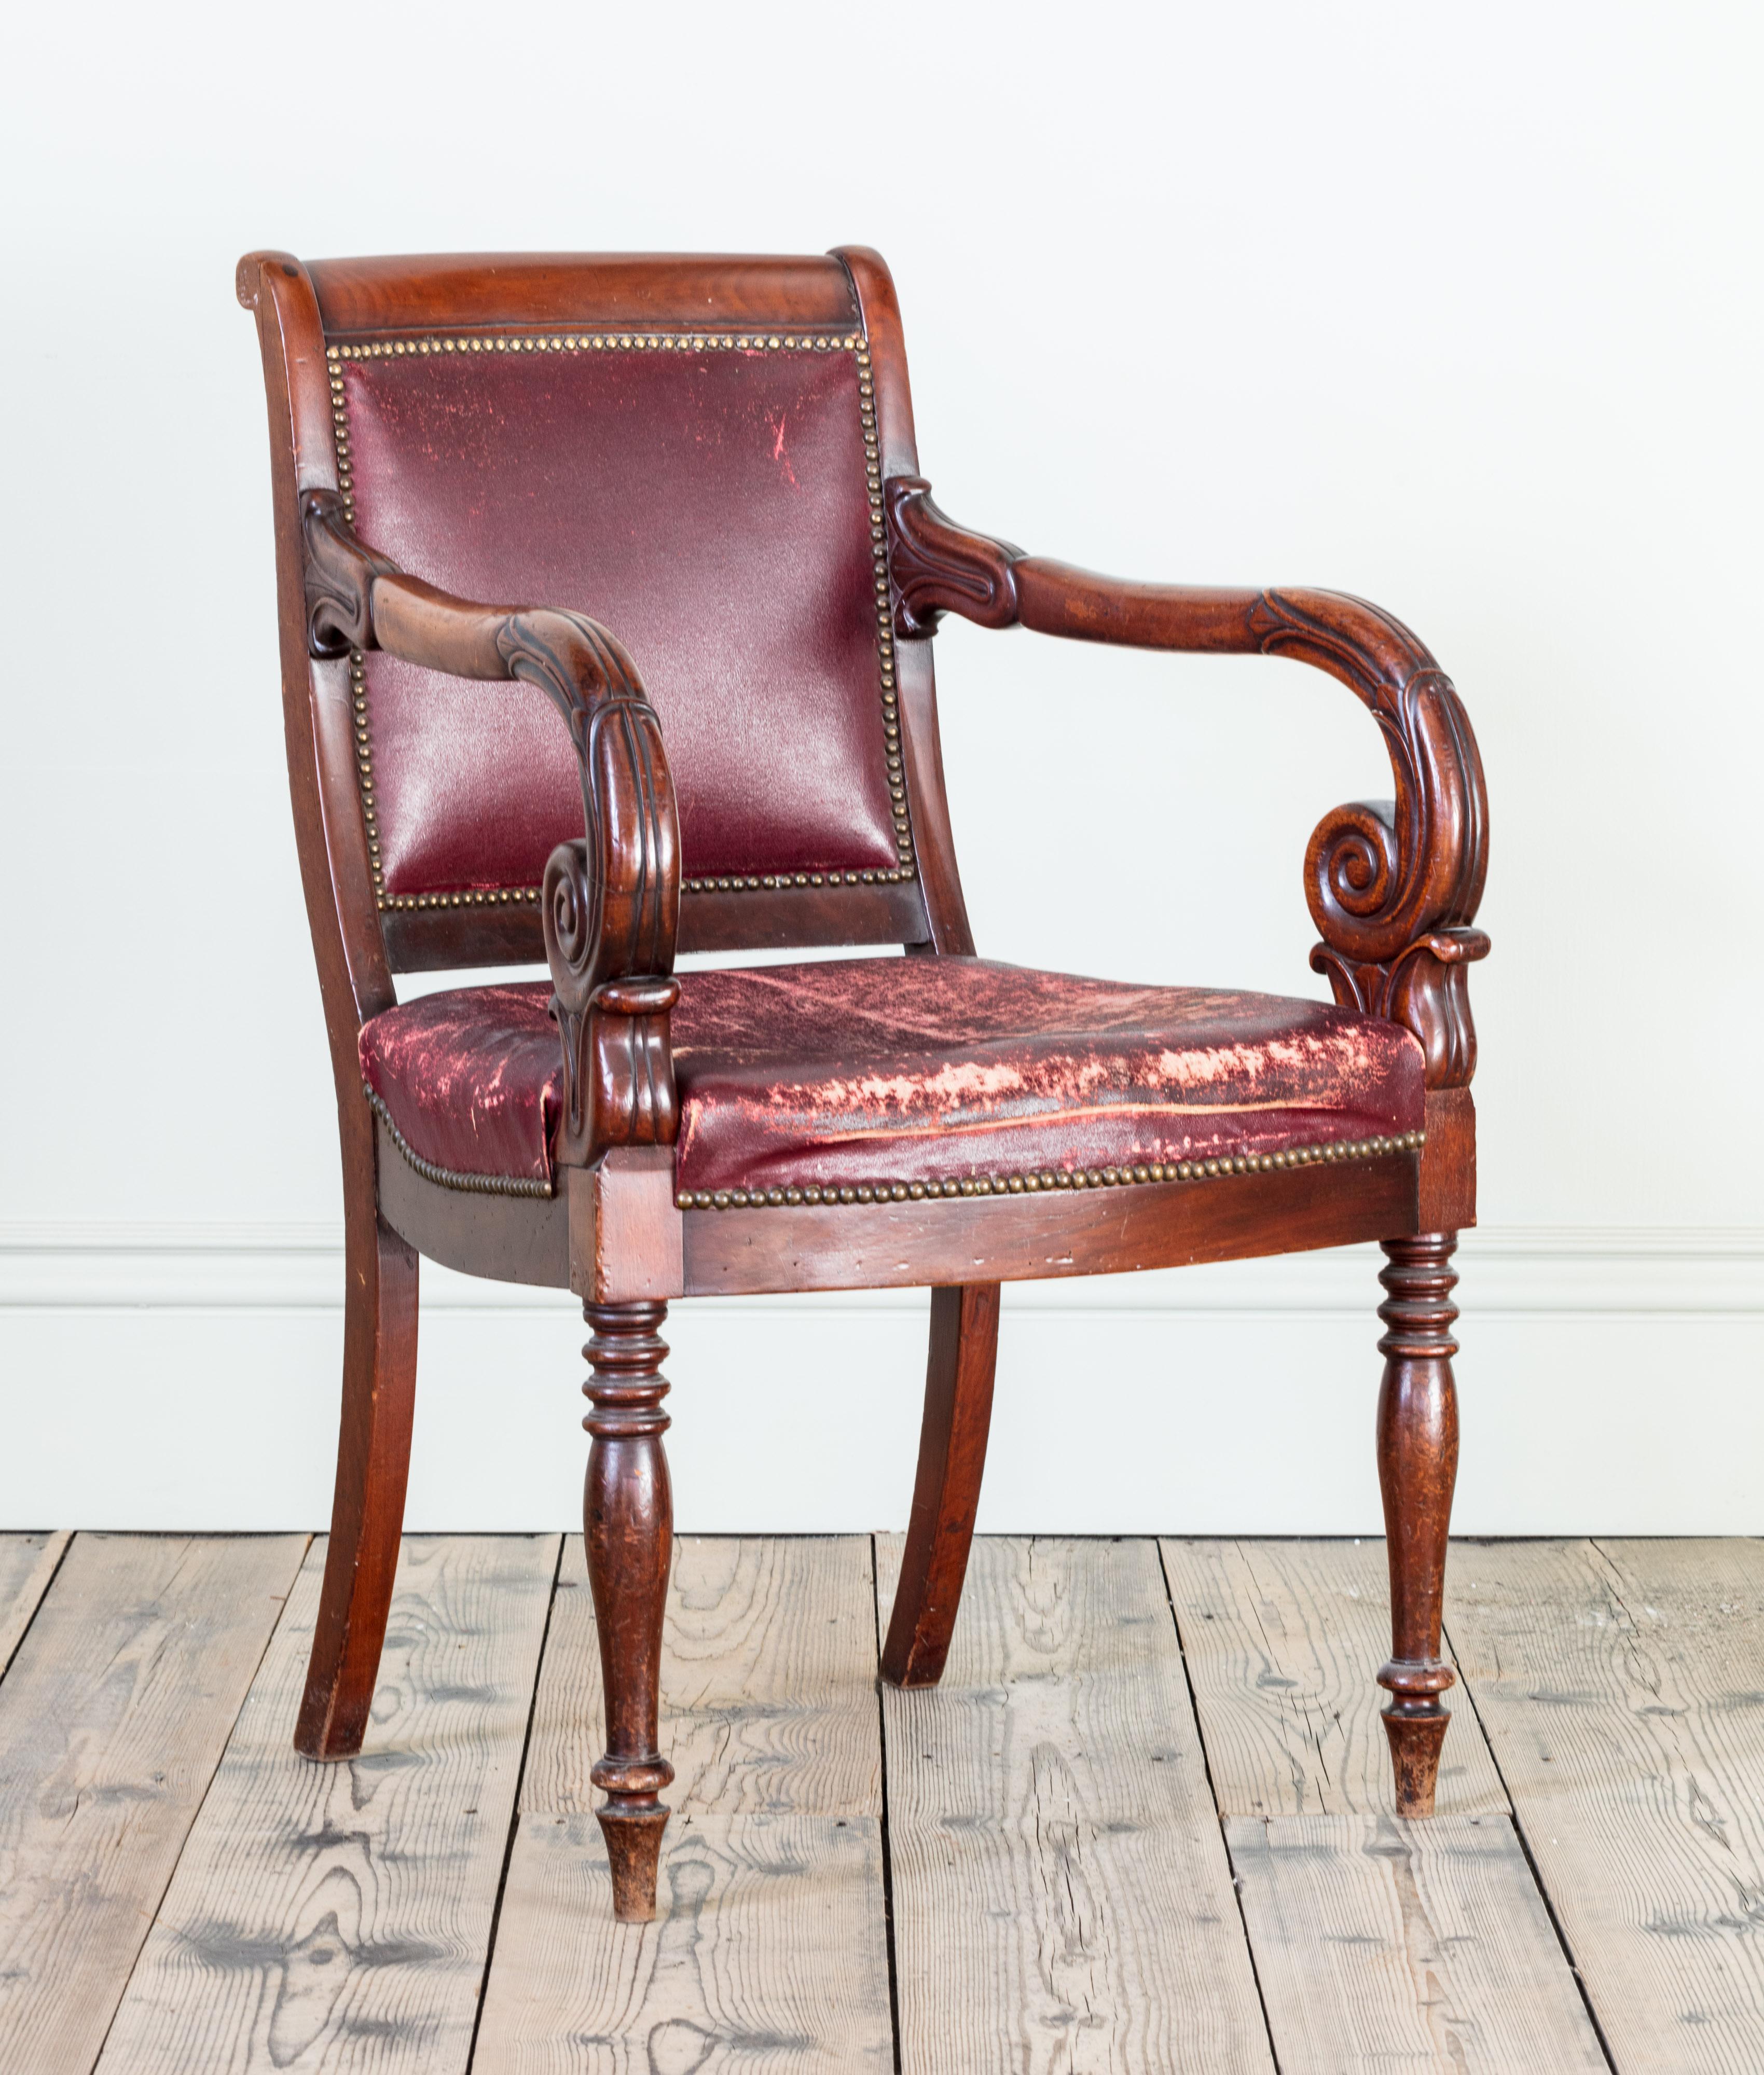 With faded and worn red Moroccan leather upholstery.